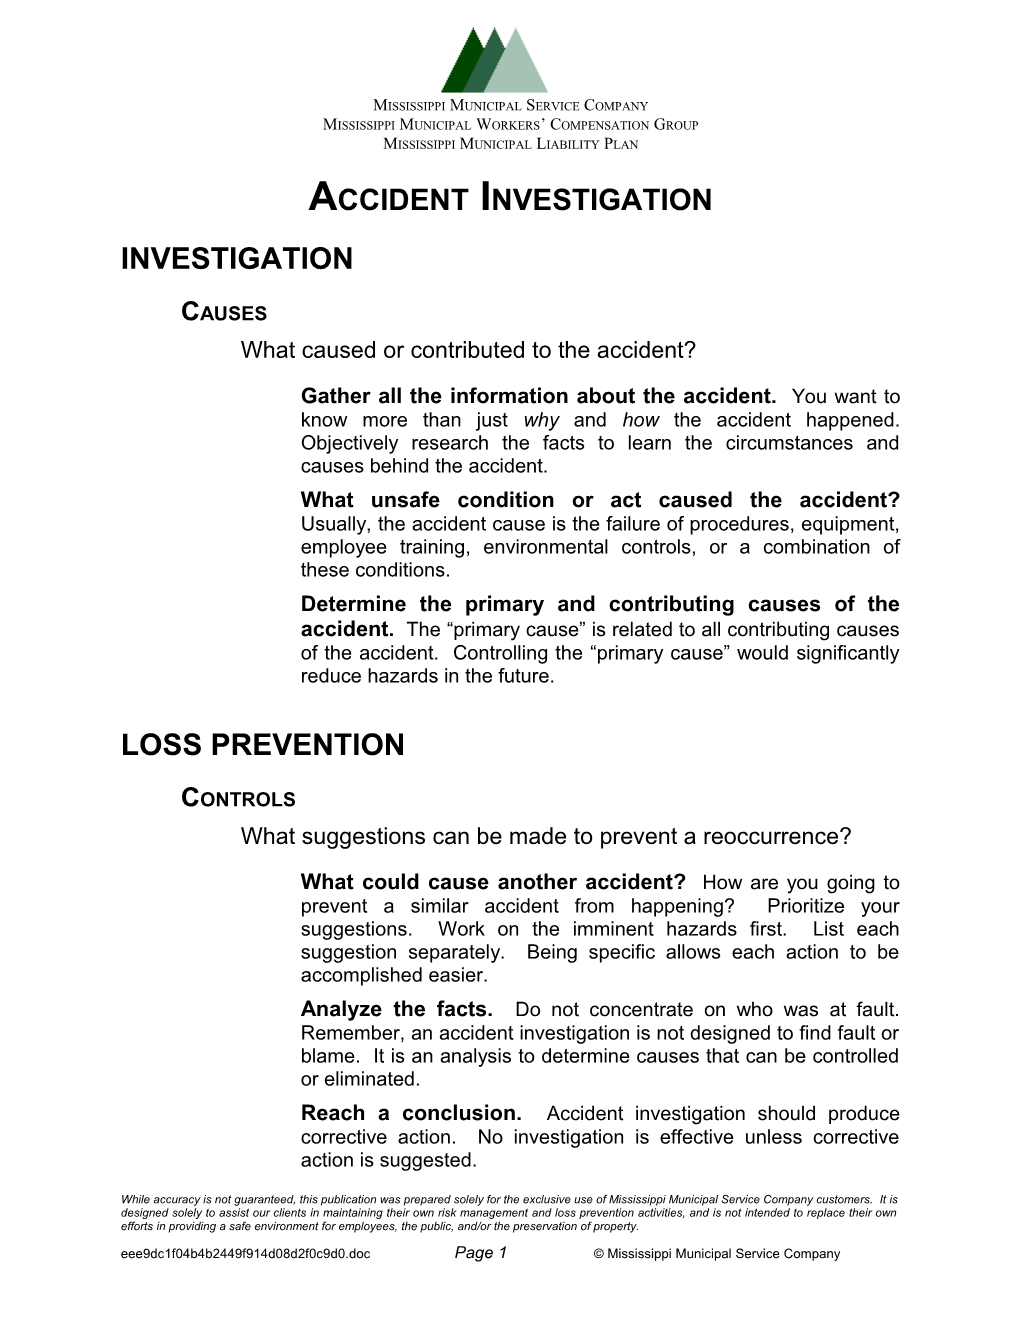 Five Basic Questions of Accident Investigation